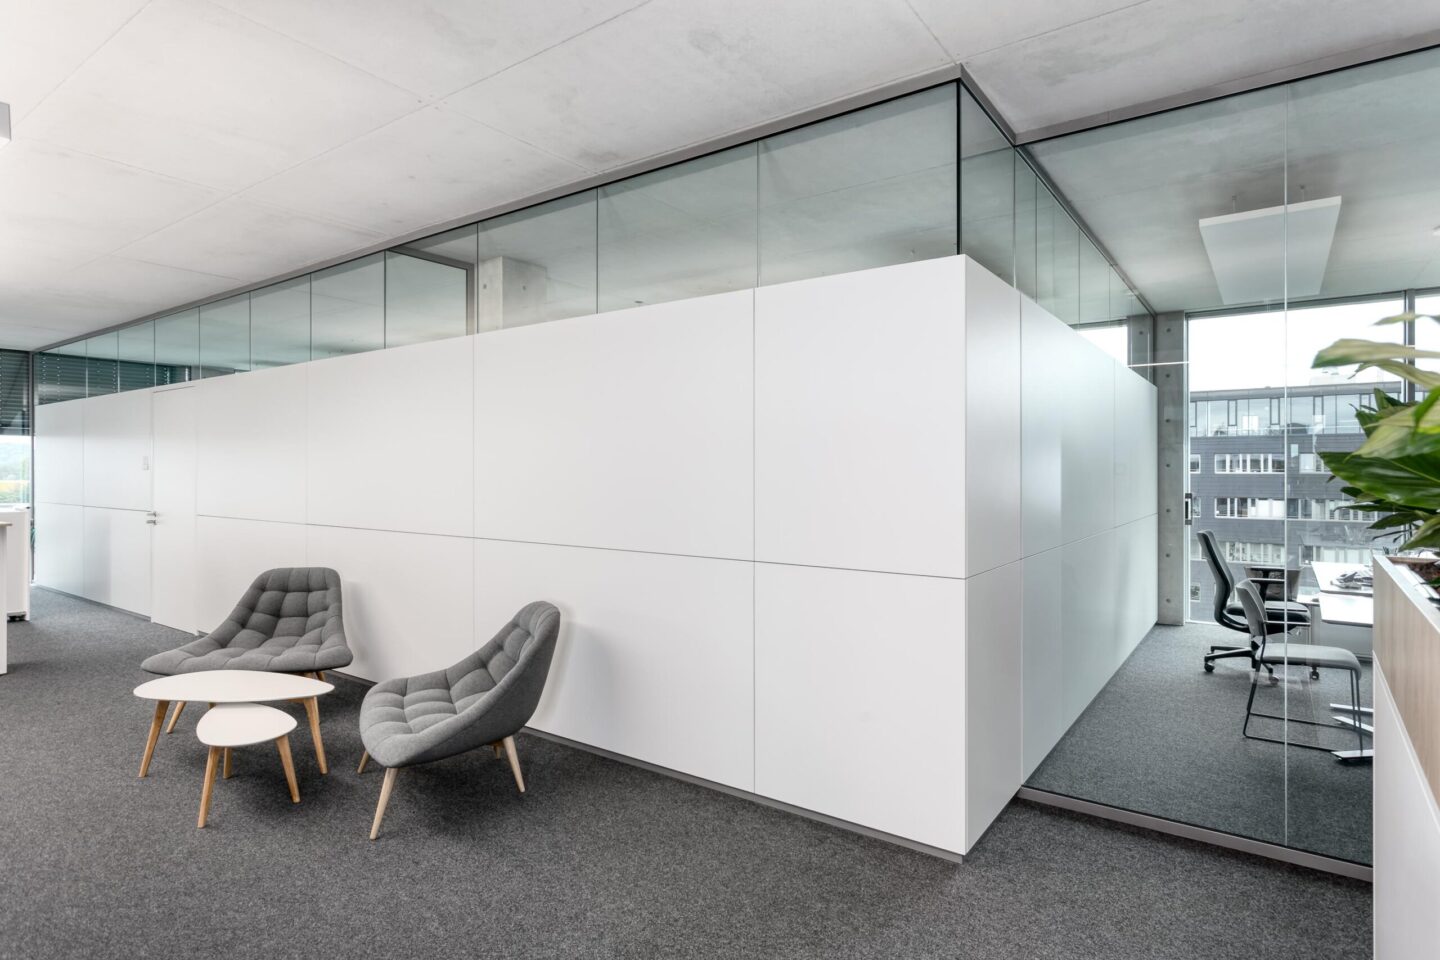 feco-feederle│partition wall systems│projects│weisenburger Karlsruhe